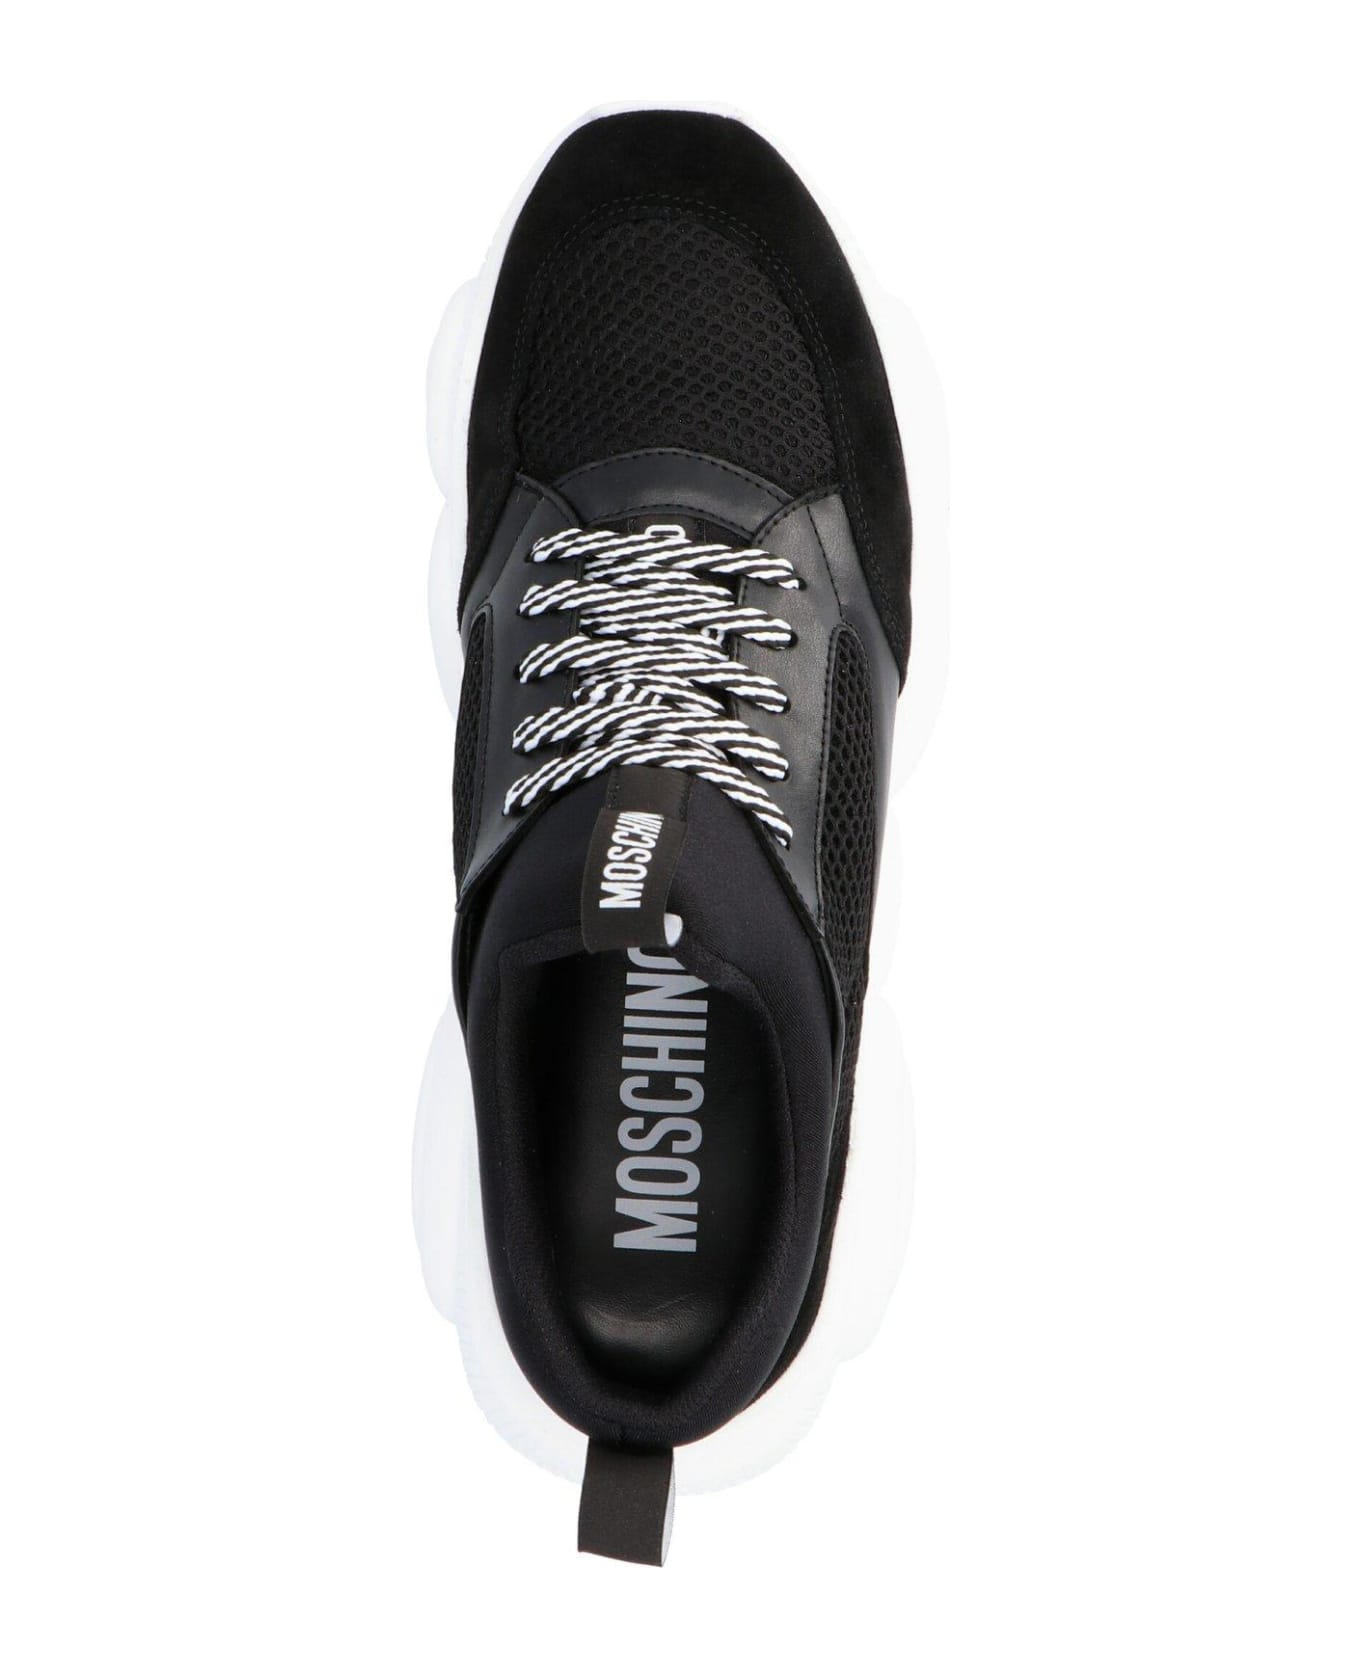 Moschino Teddy Lace-up Sneakers - Black スニーカー